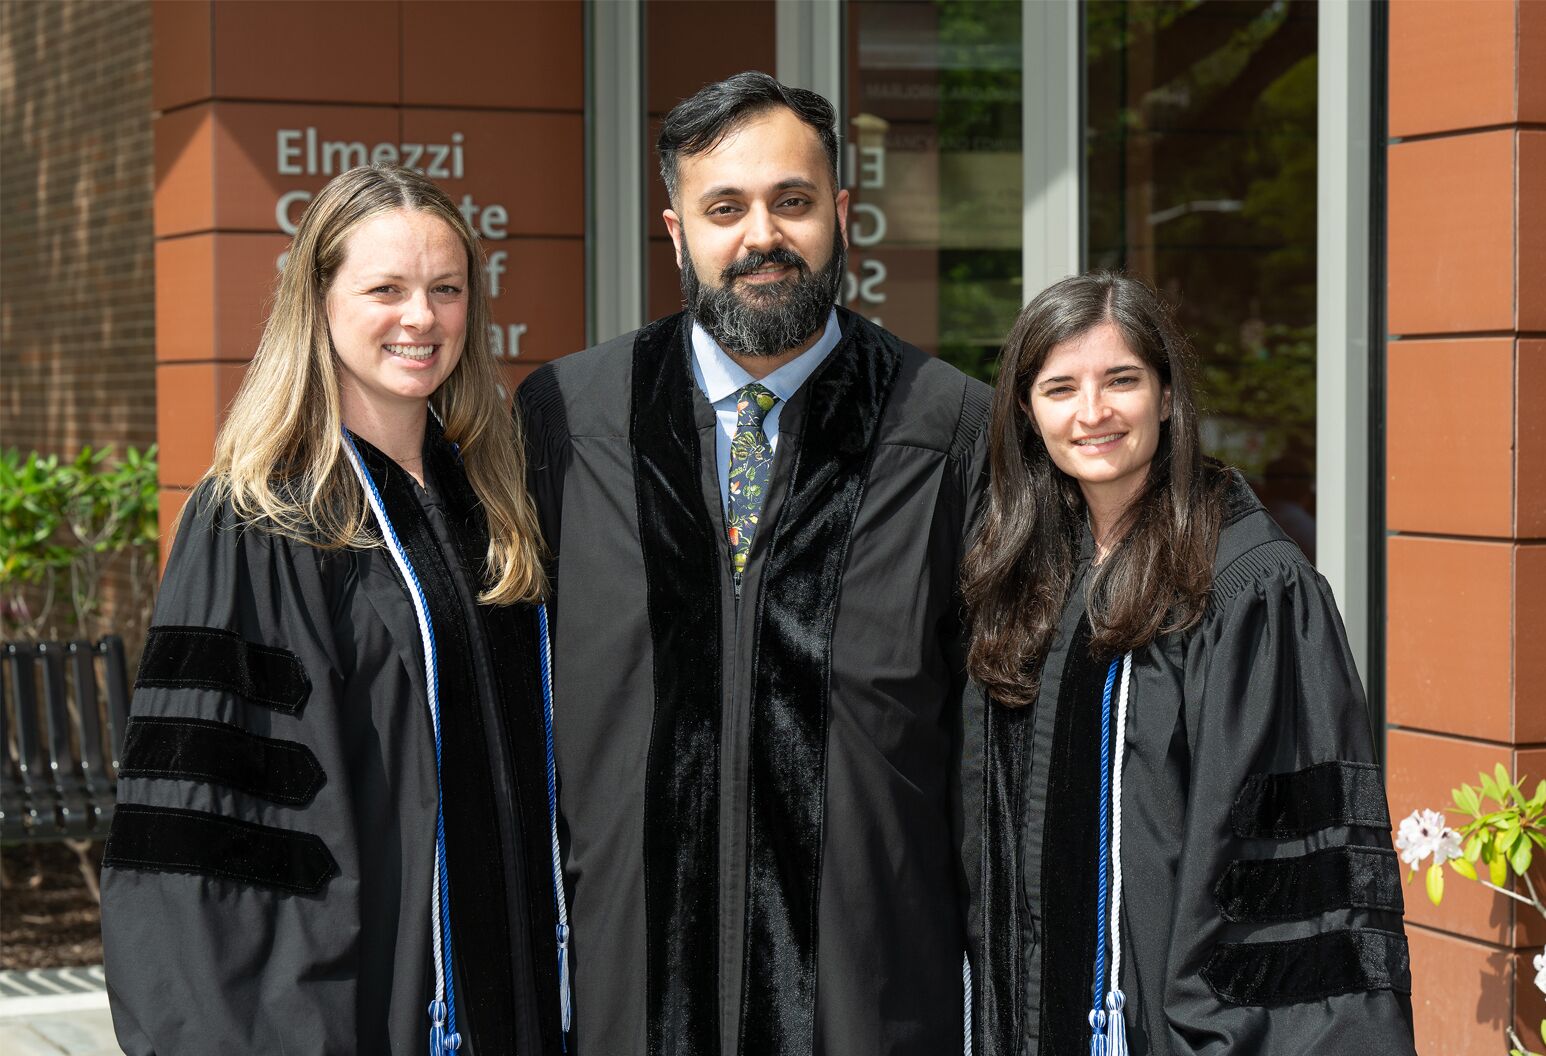 A man and two women stand side-by-side in dark graduation robes and cords and pose for a photograph.